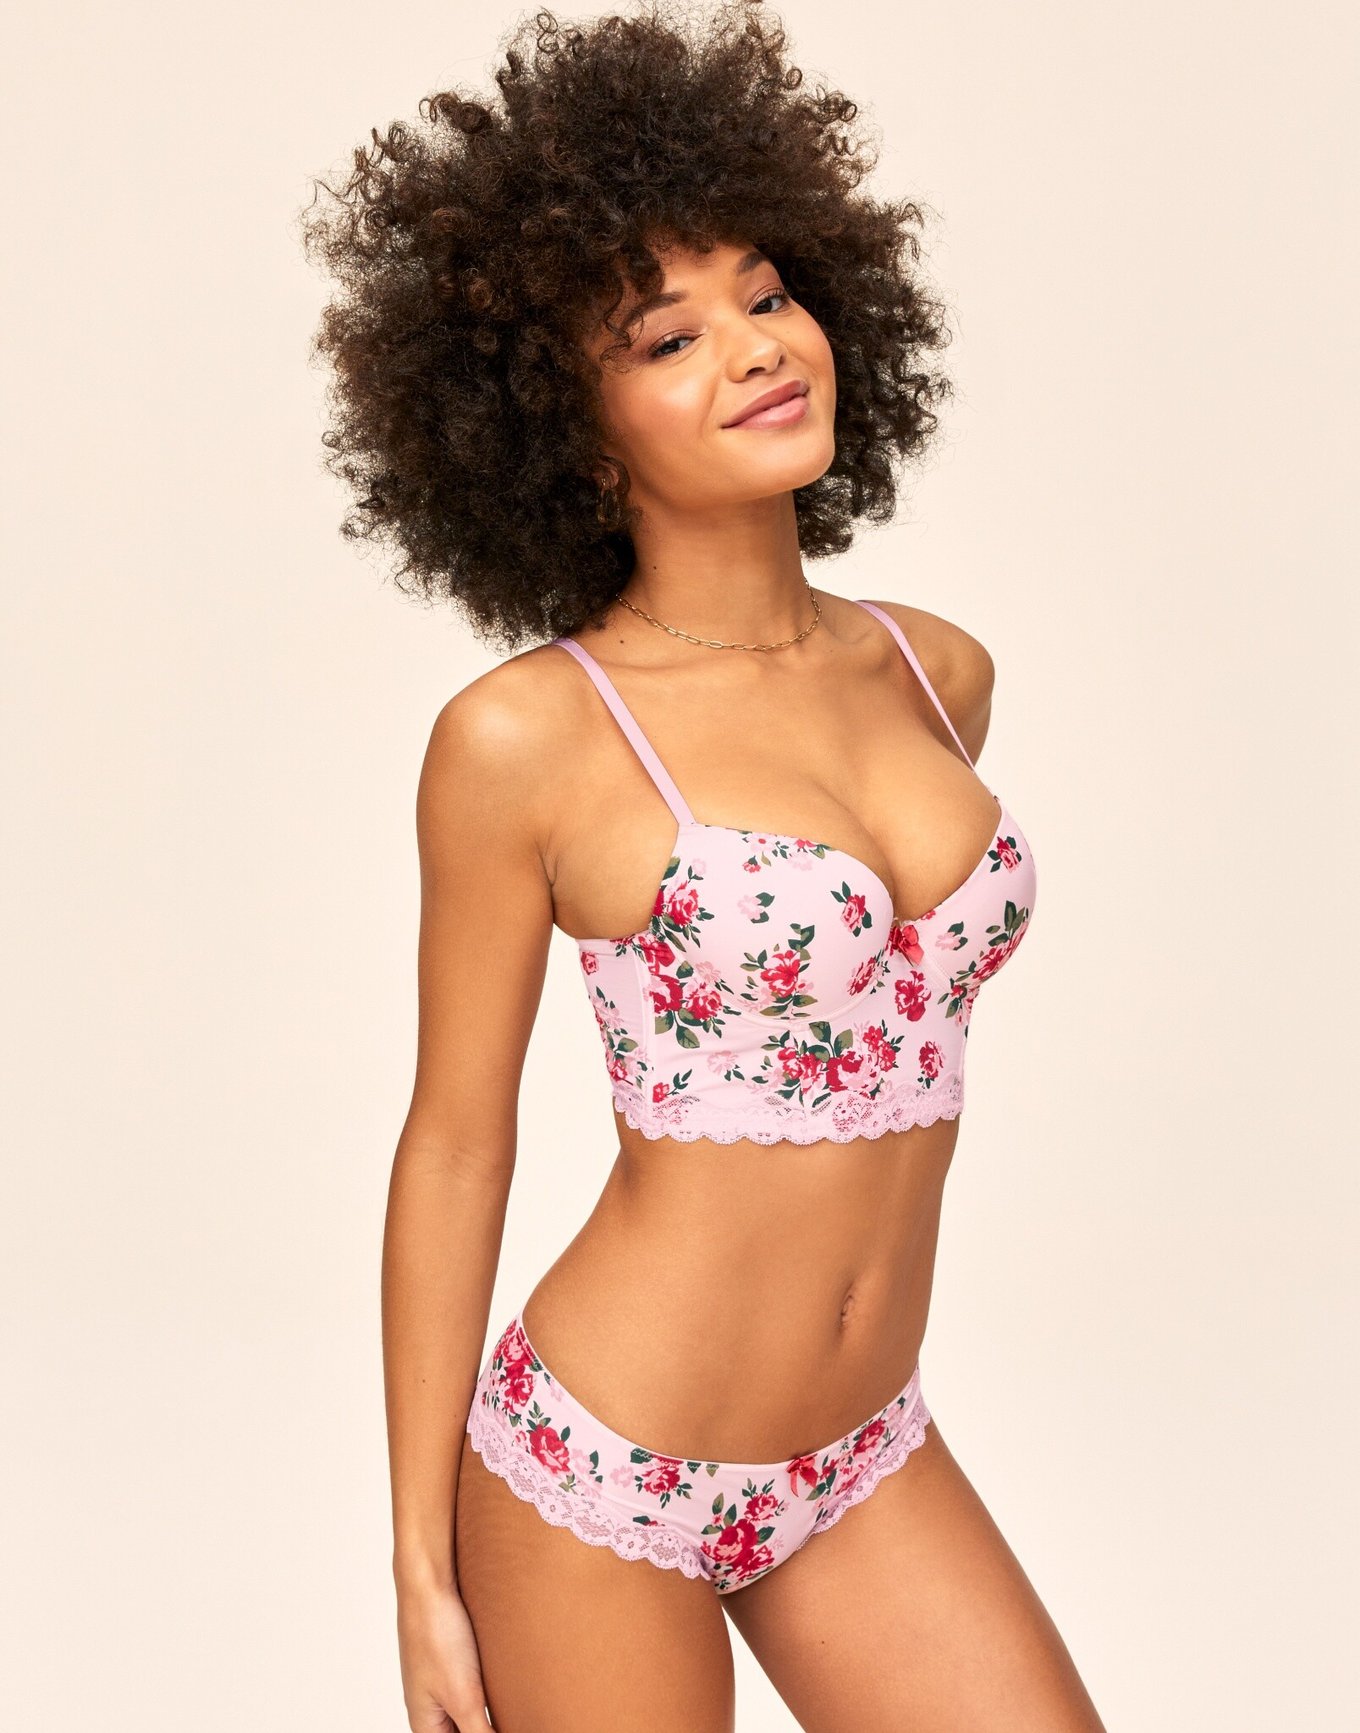 Floral Secrets Bra! It does making the girls look good but if you orde